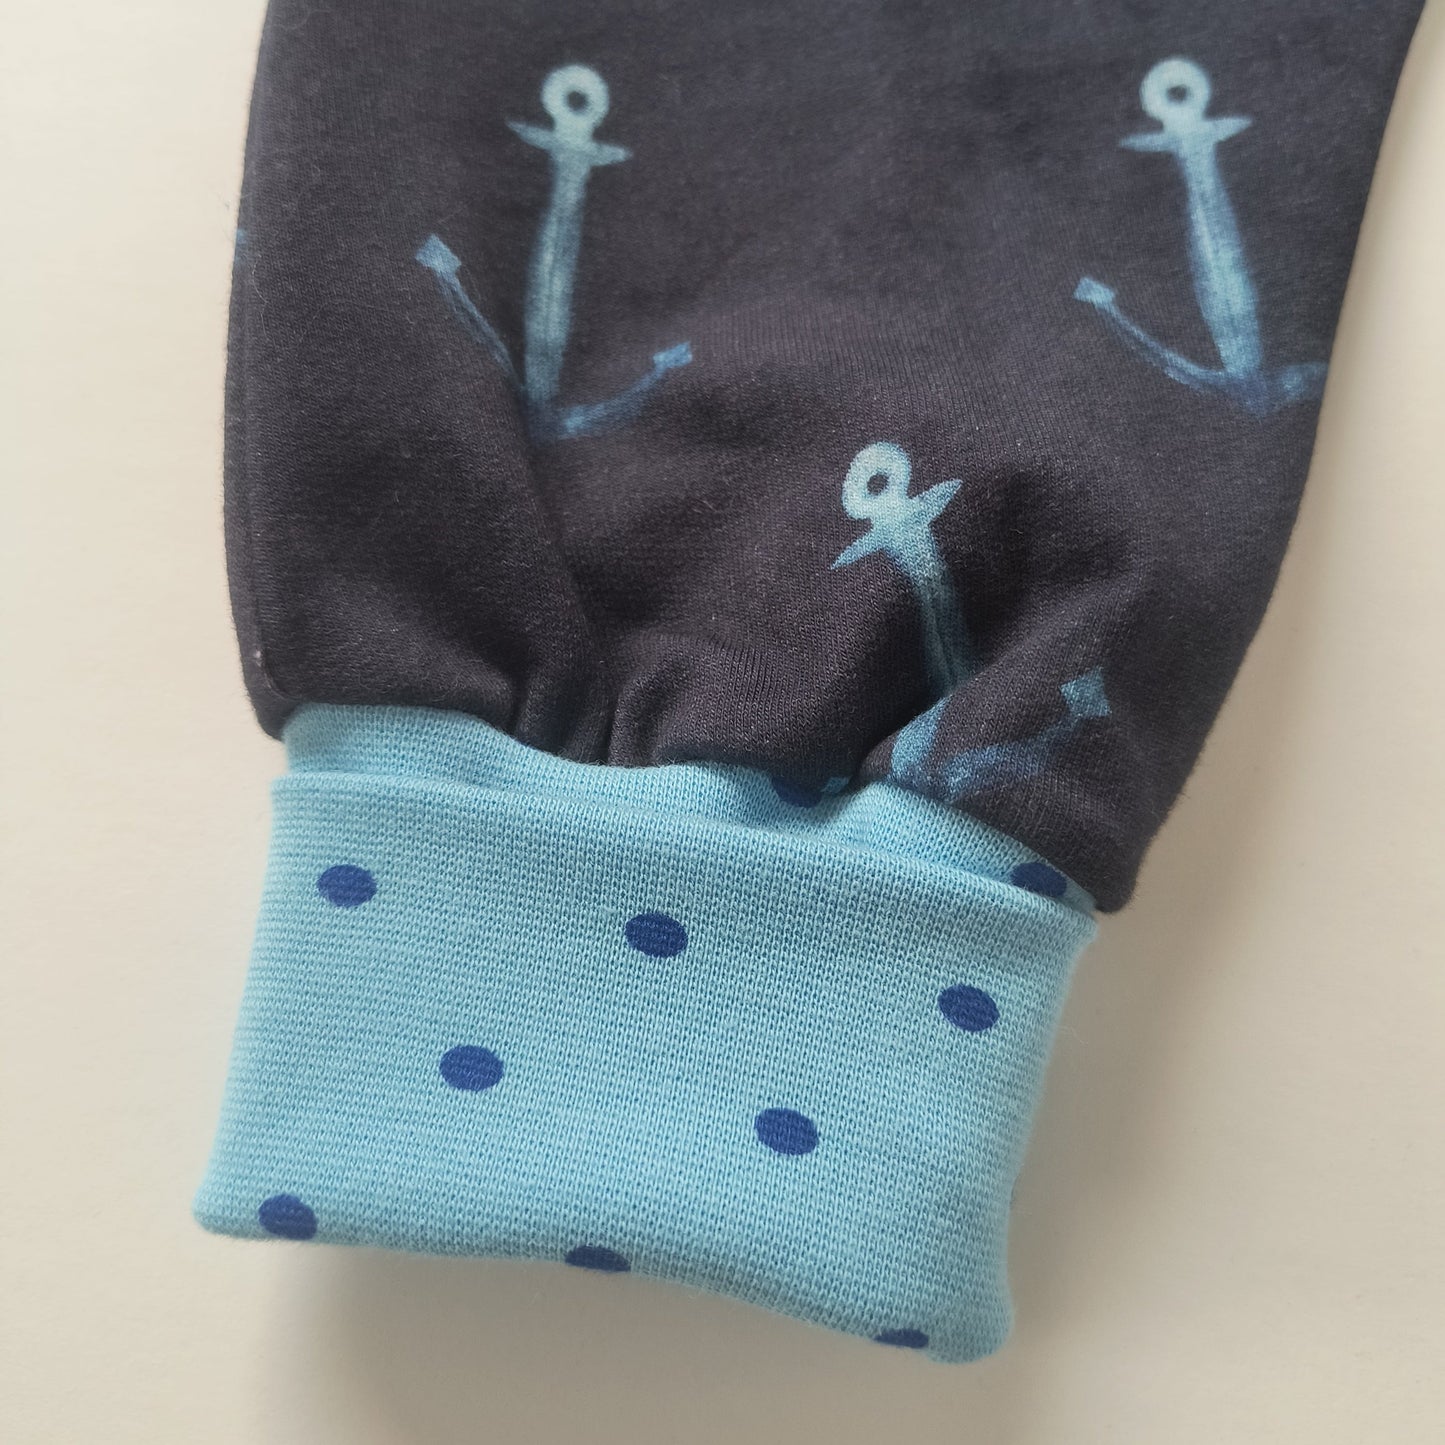 Toddler sweatpants "grow with me", maritime anchor, size EUR 92-98 cm/US 18-36 months (Handmade in Canada)